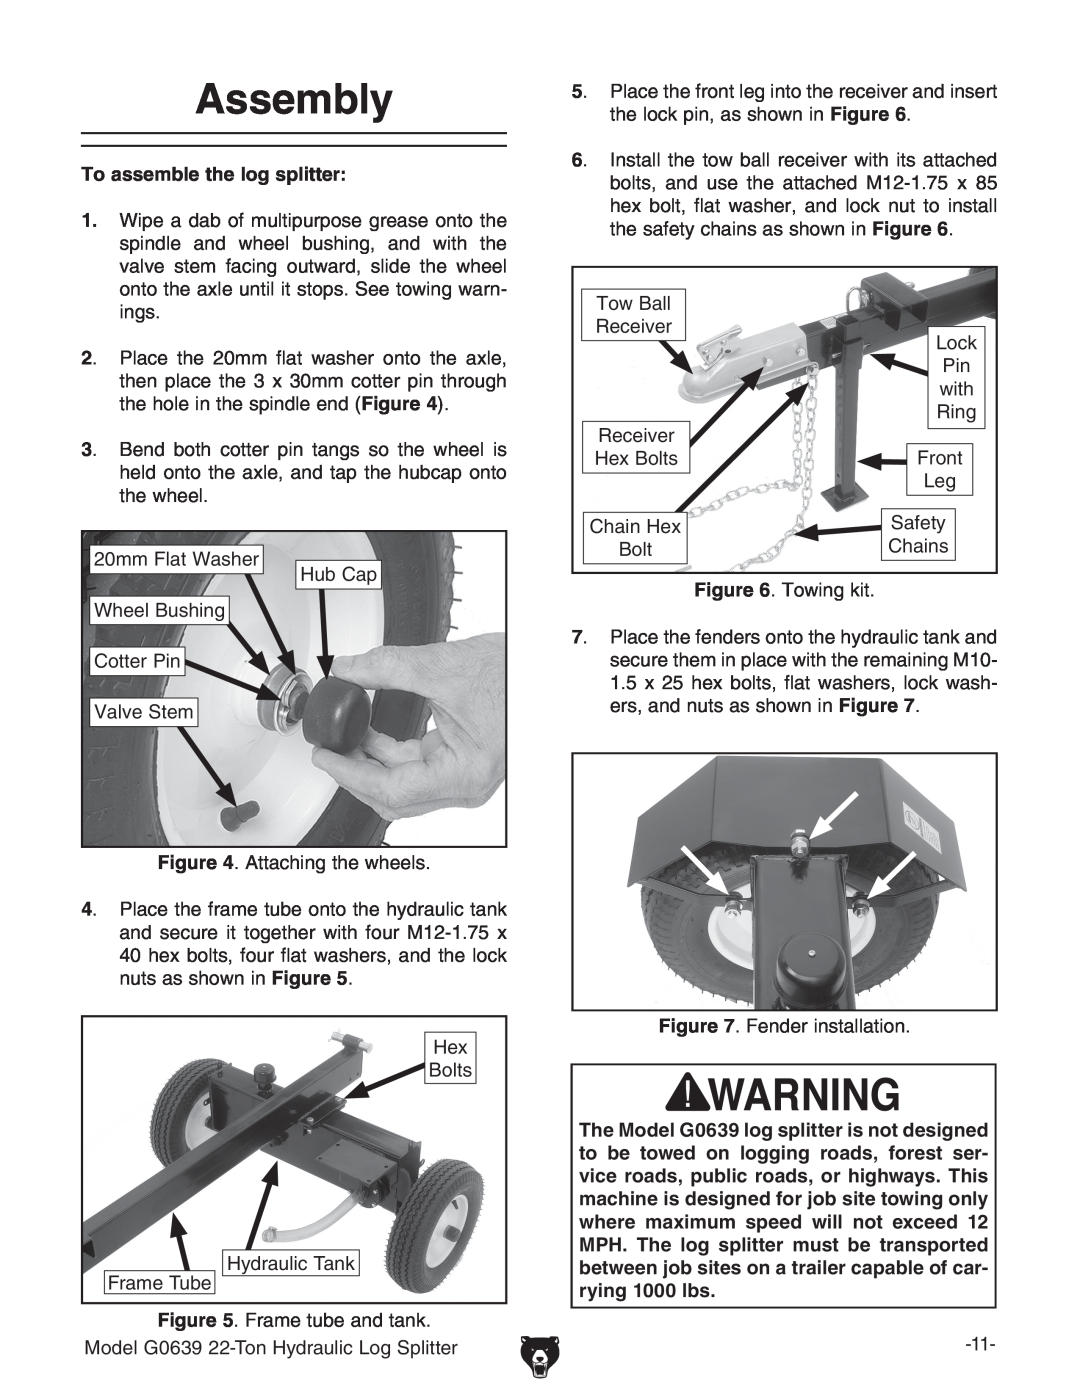 Grizzly G0639 owner manual Assembly, To assemble the log splitter 